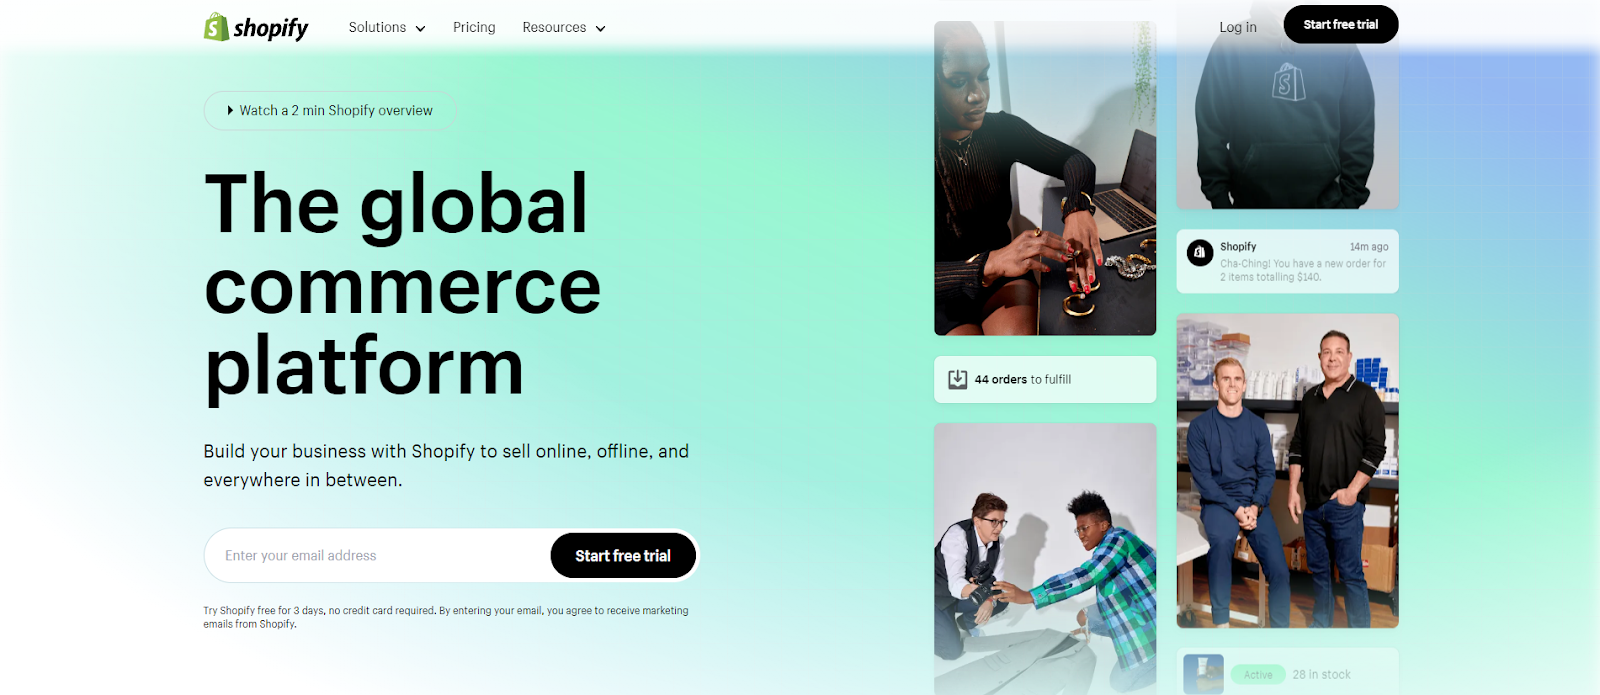 A screenshot of Shopify's home page